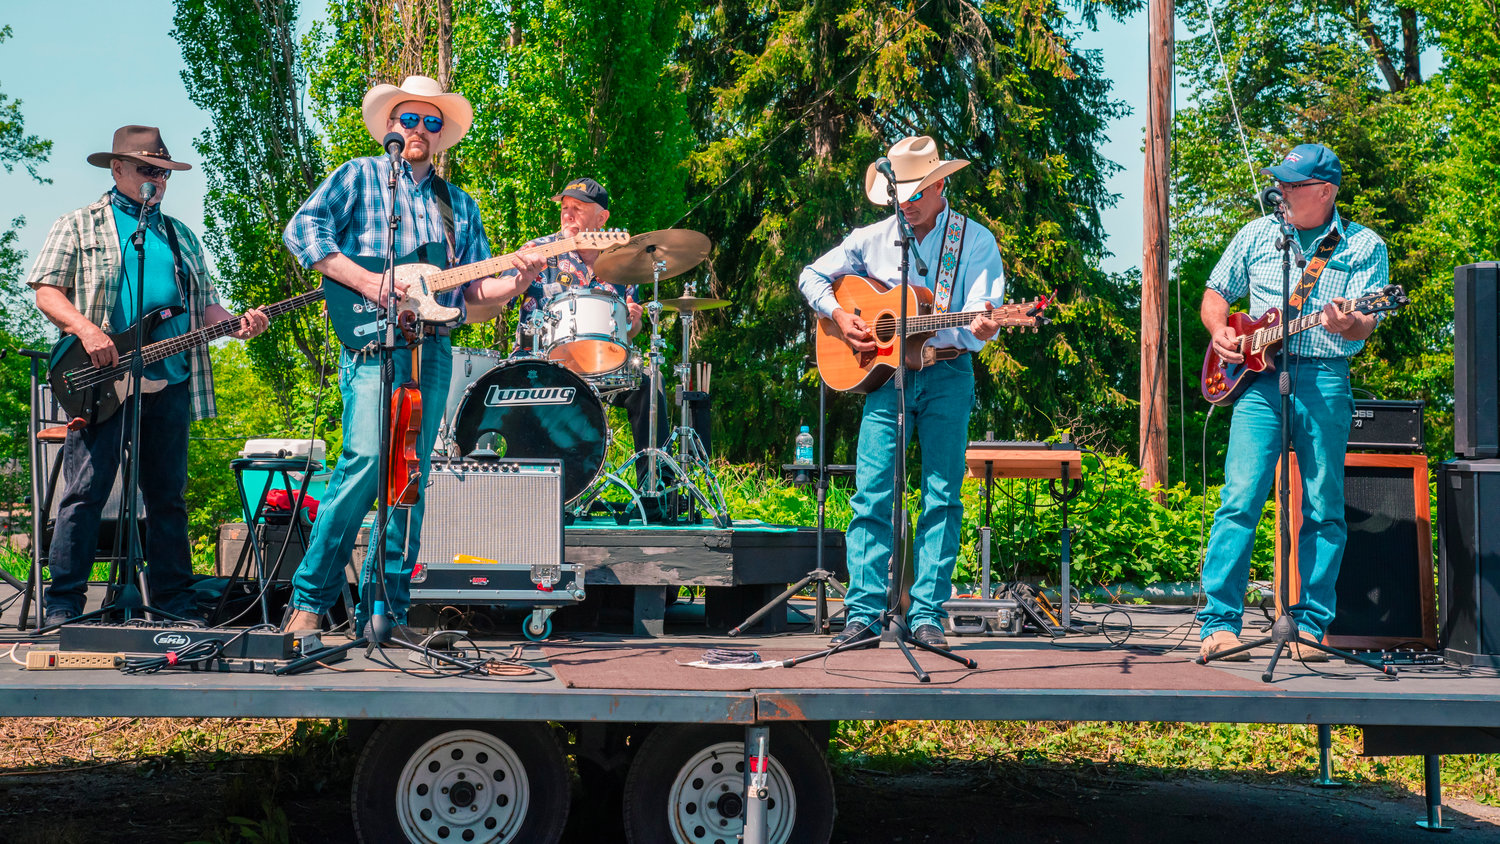 Pat Murphy and the Straightshot Band with special guest Chris Guenther perform outside the Adna Burger Bar during a “Back The Blue” event on Saturday.